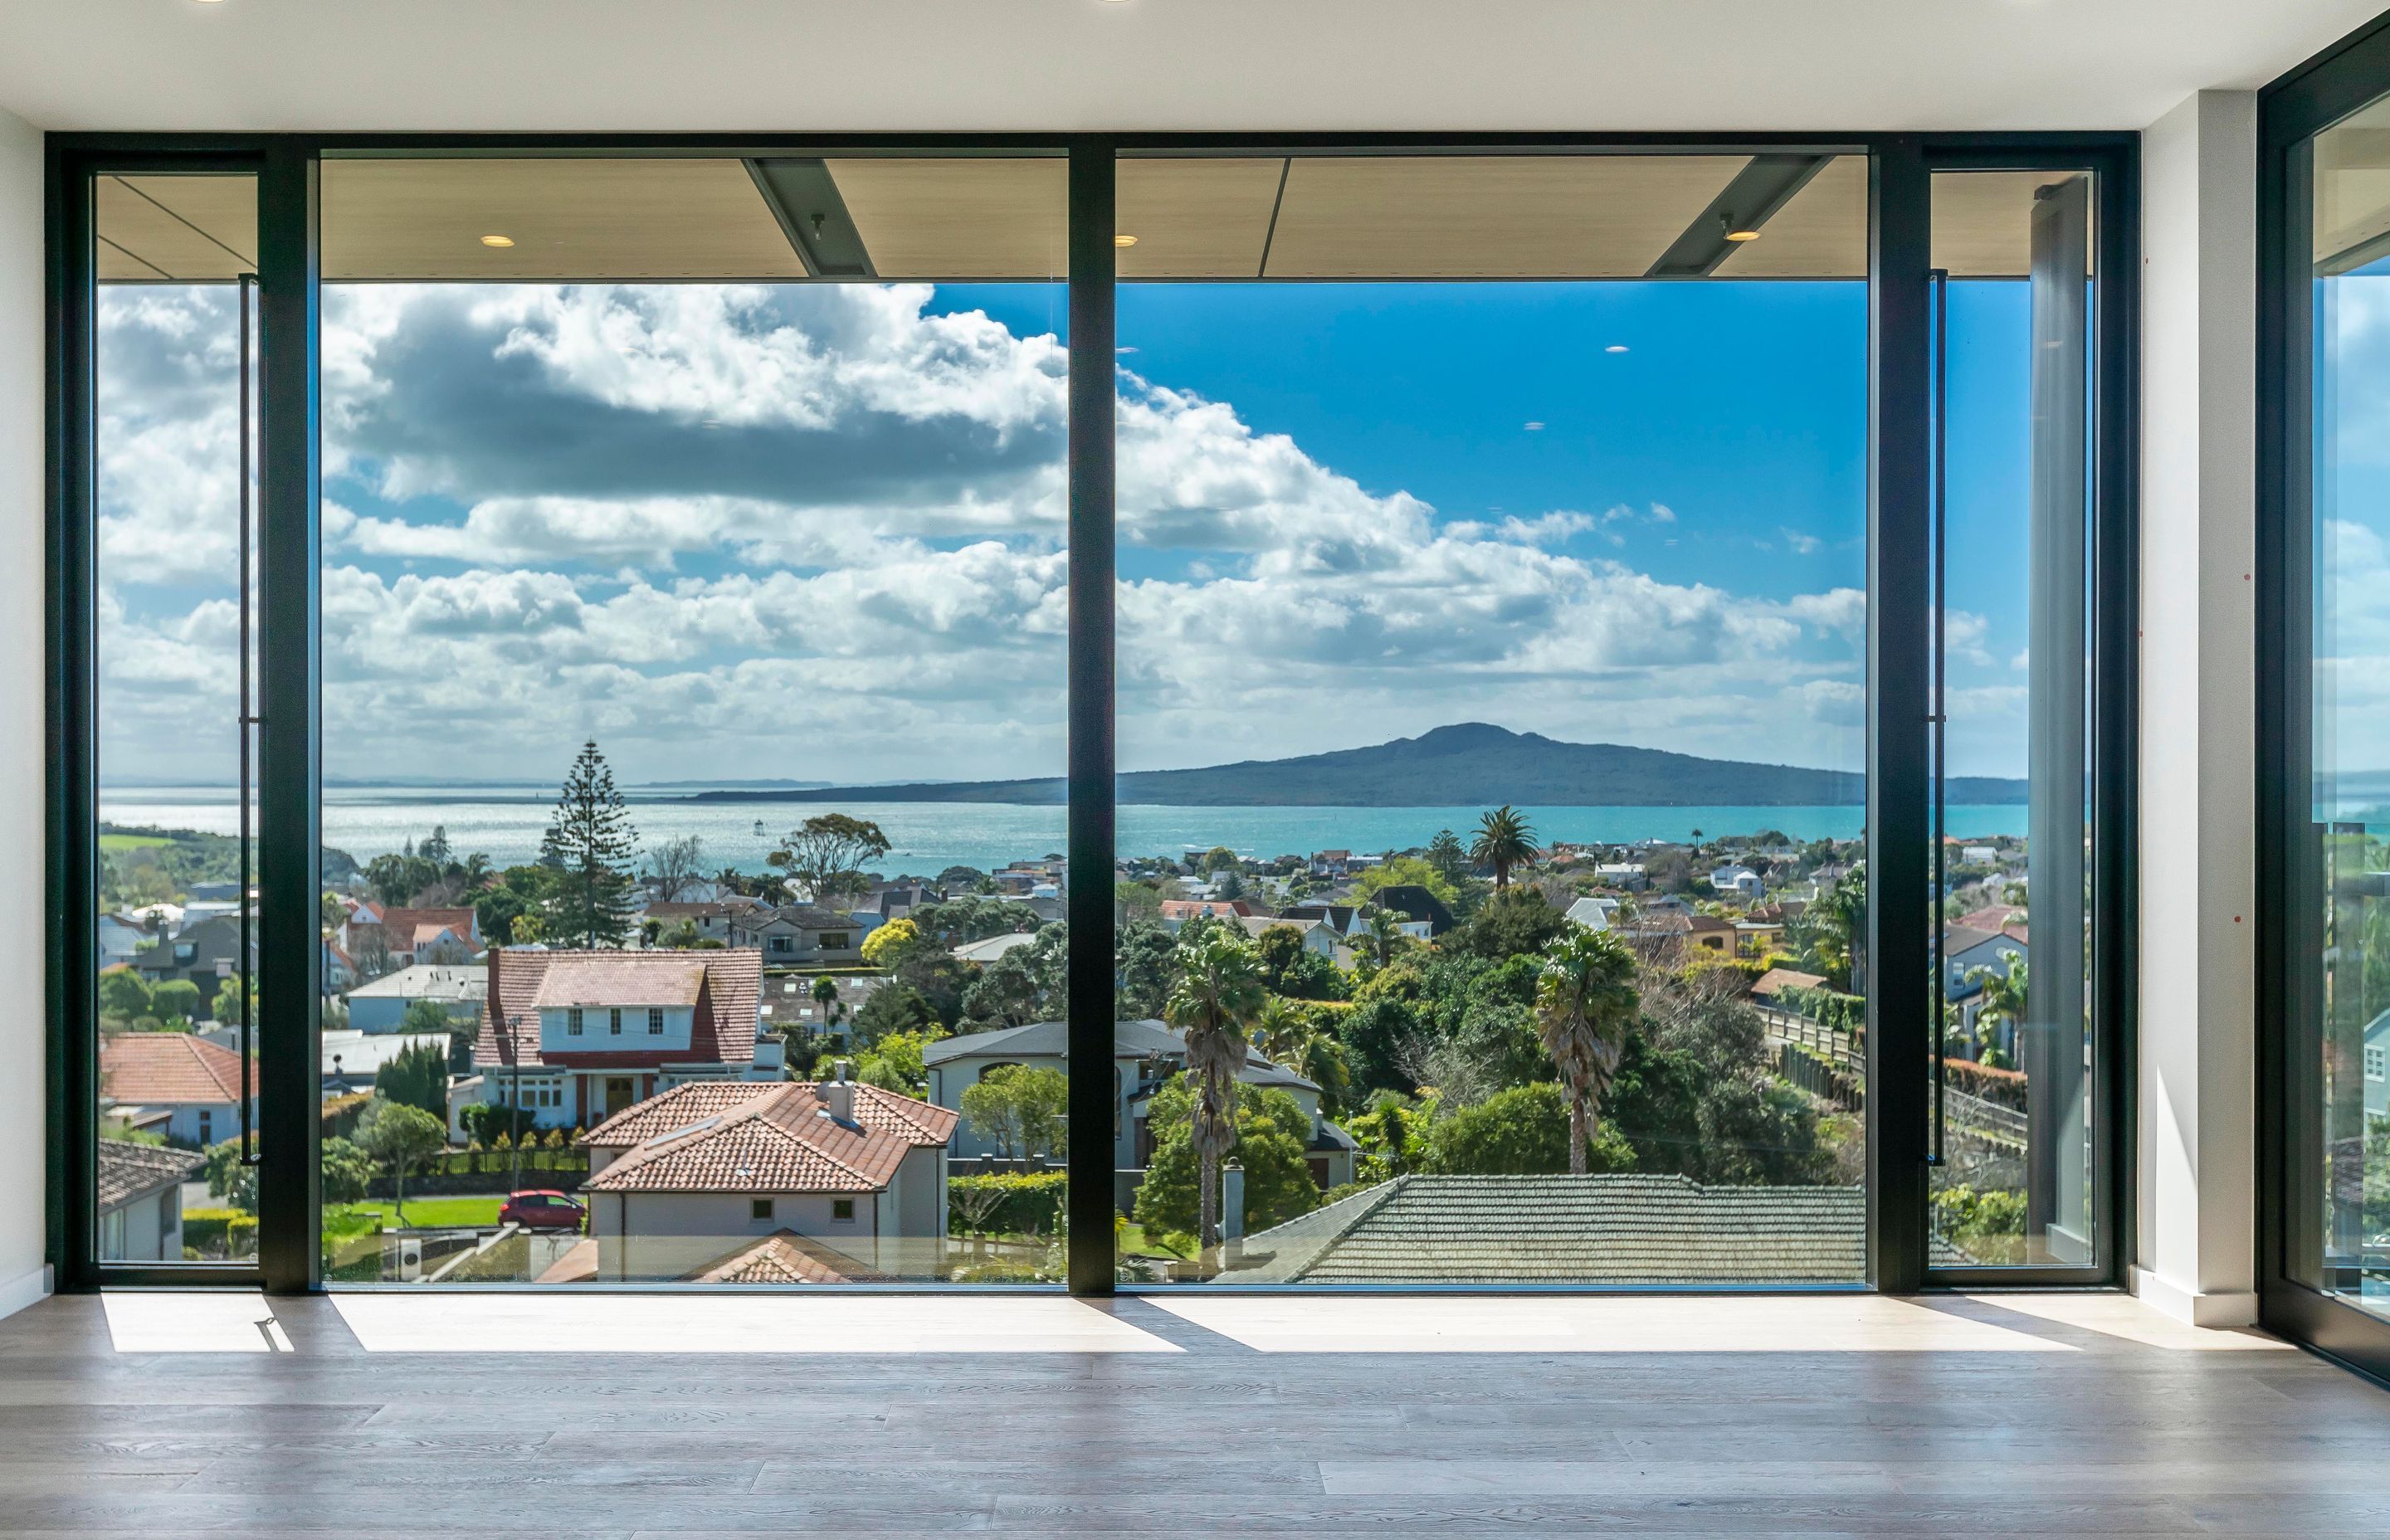 Due to its location on a ridgeline, and scale in comparison to the surrounding built environment, the views across to Rangitoto were a drawcard and resulted in the use of a facade glazed with high performance glass.